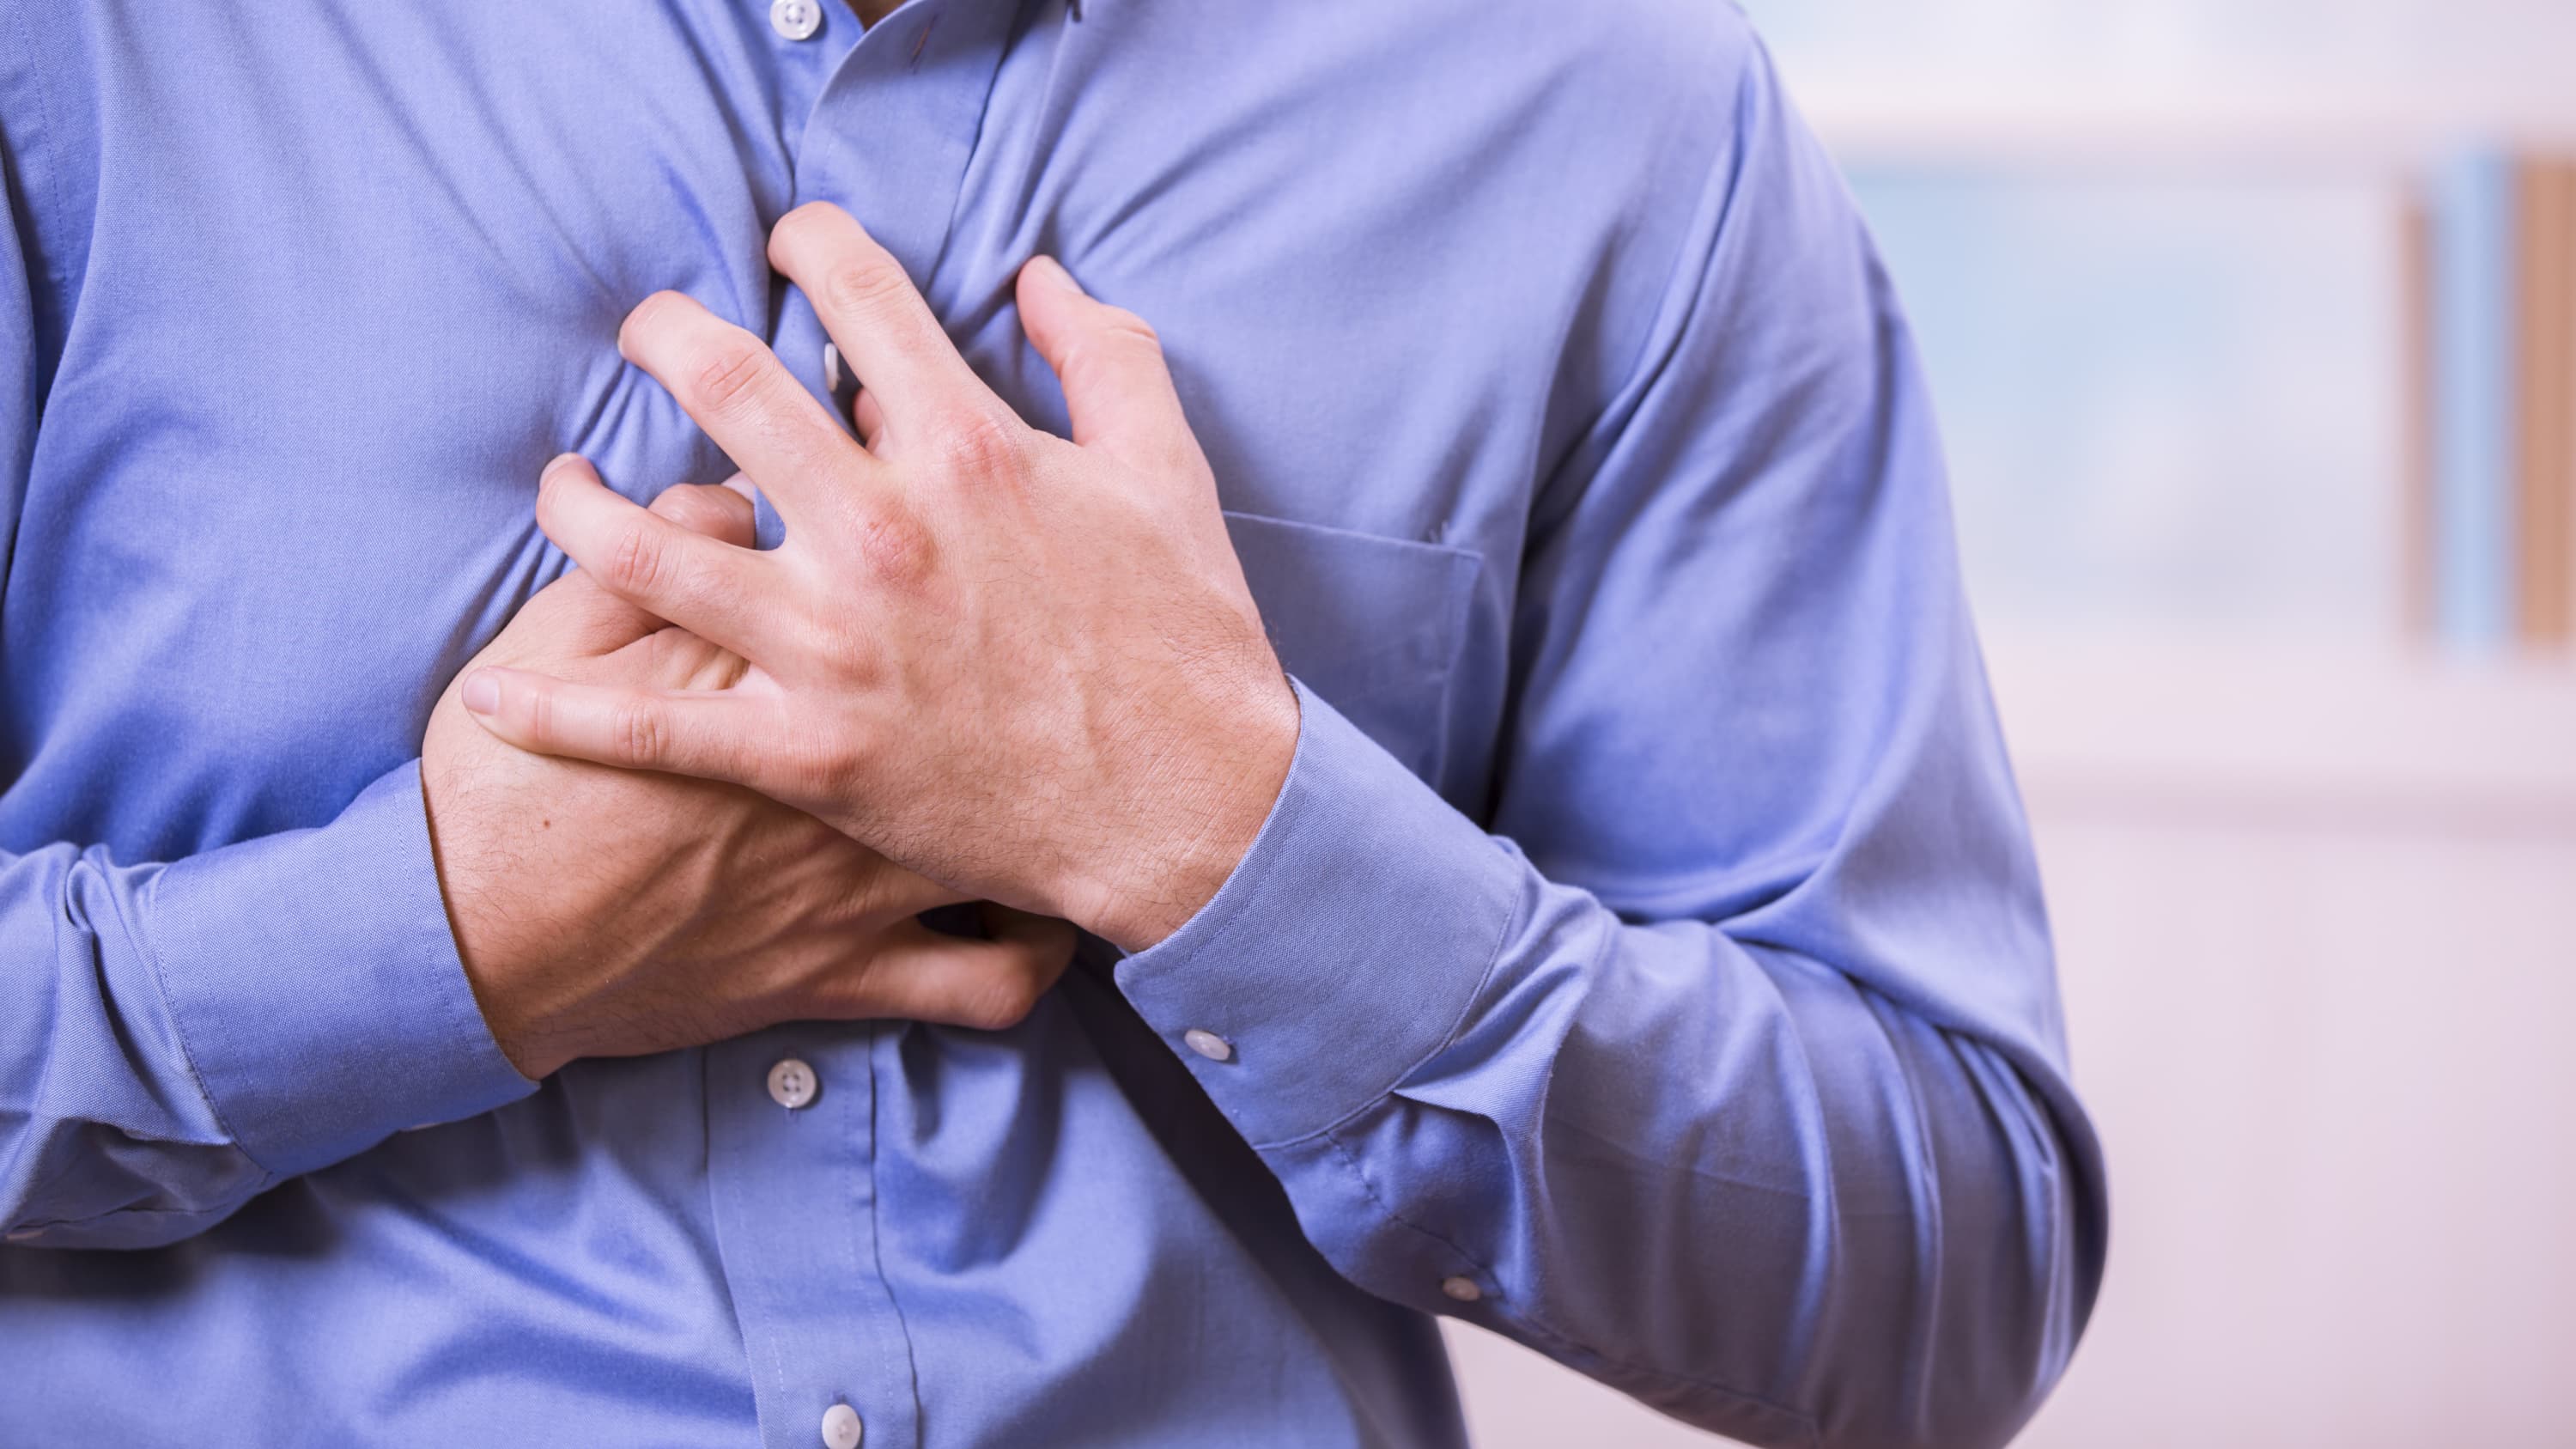 A man in a blue shirt who may have a pulmonary embolism clutches his chest.